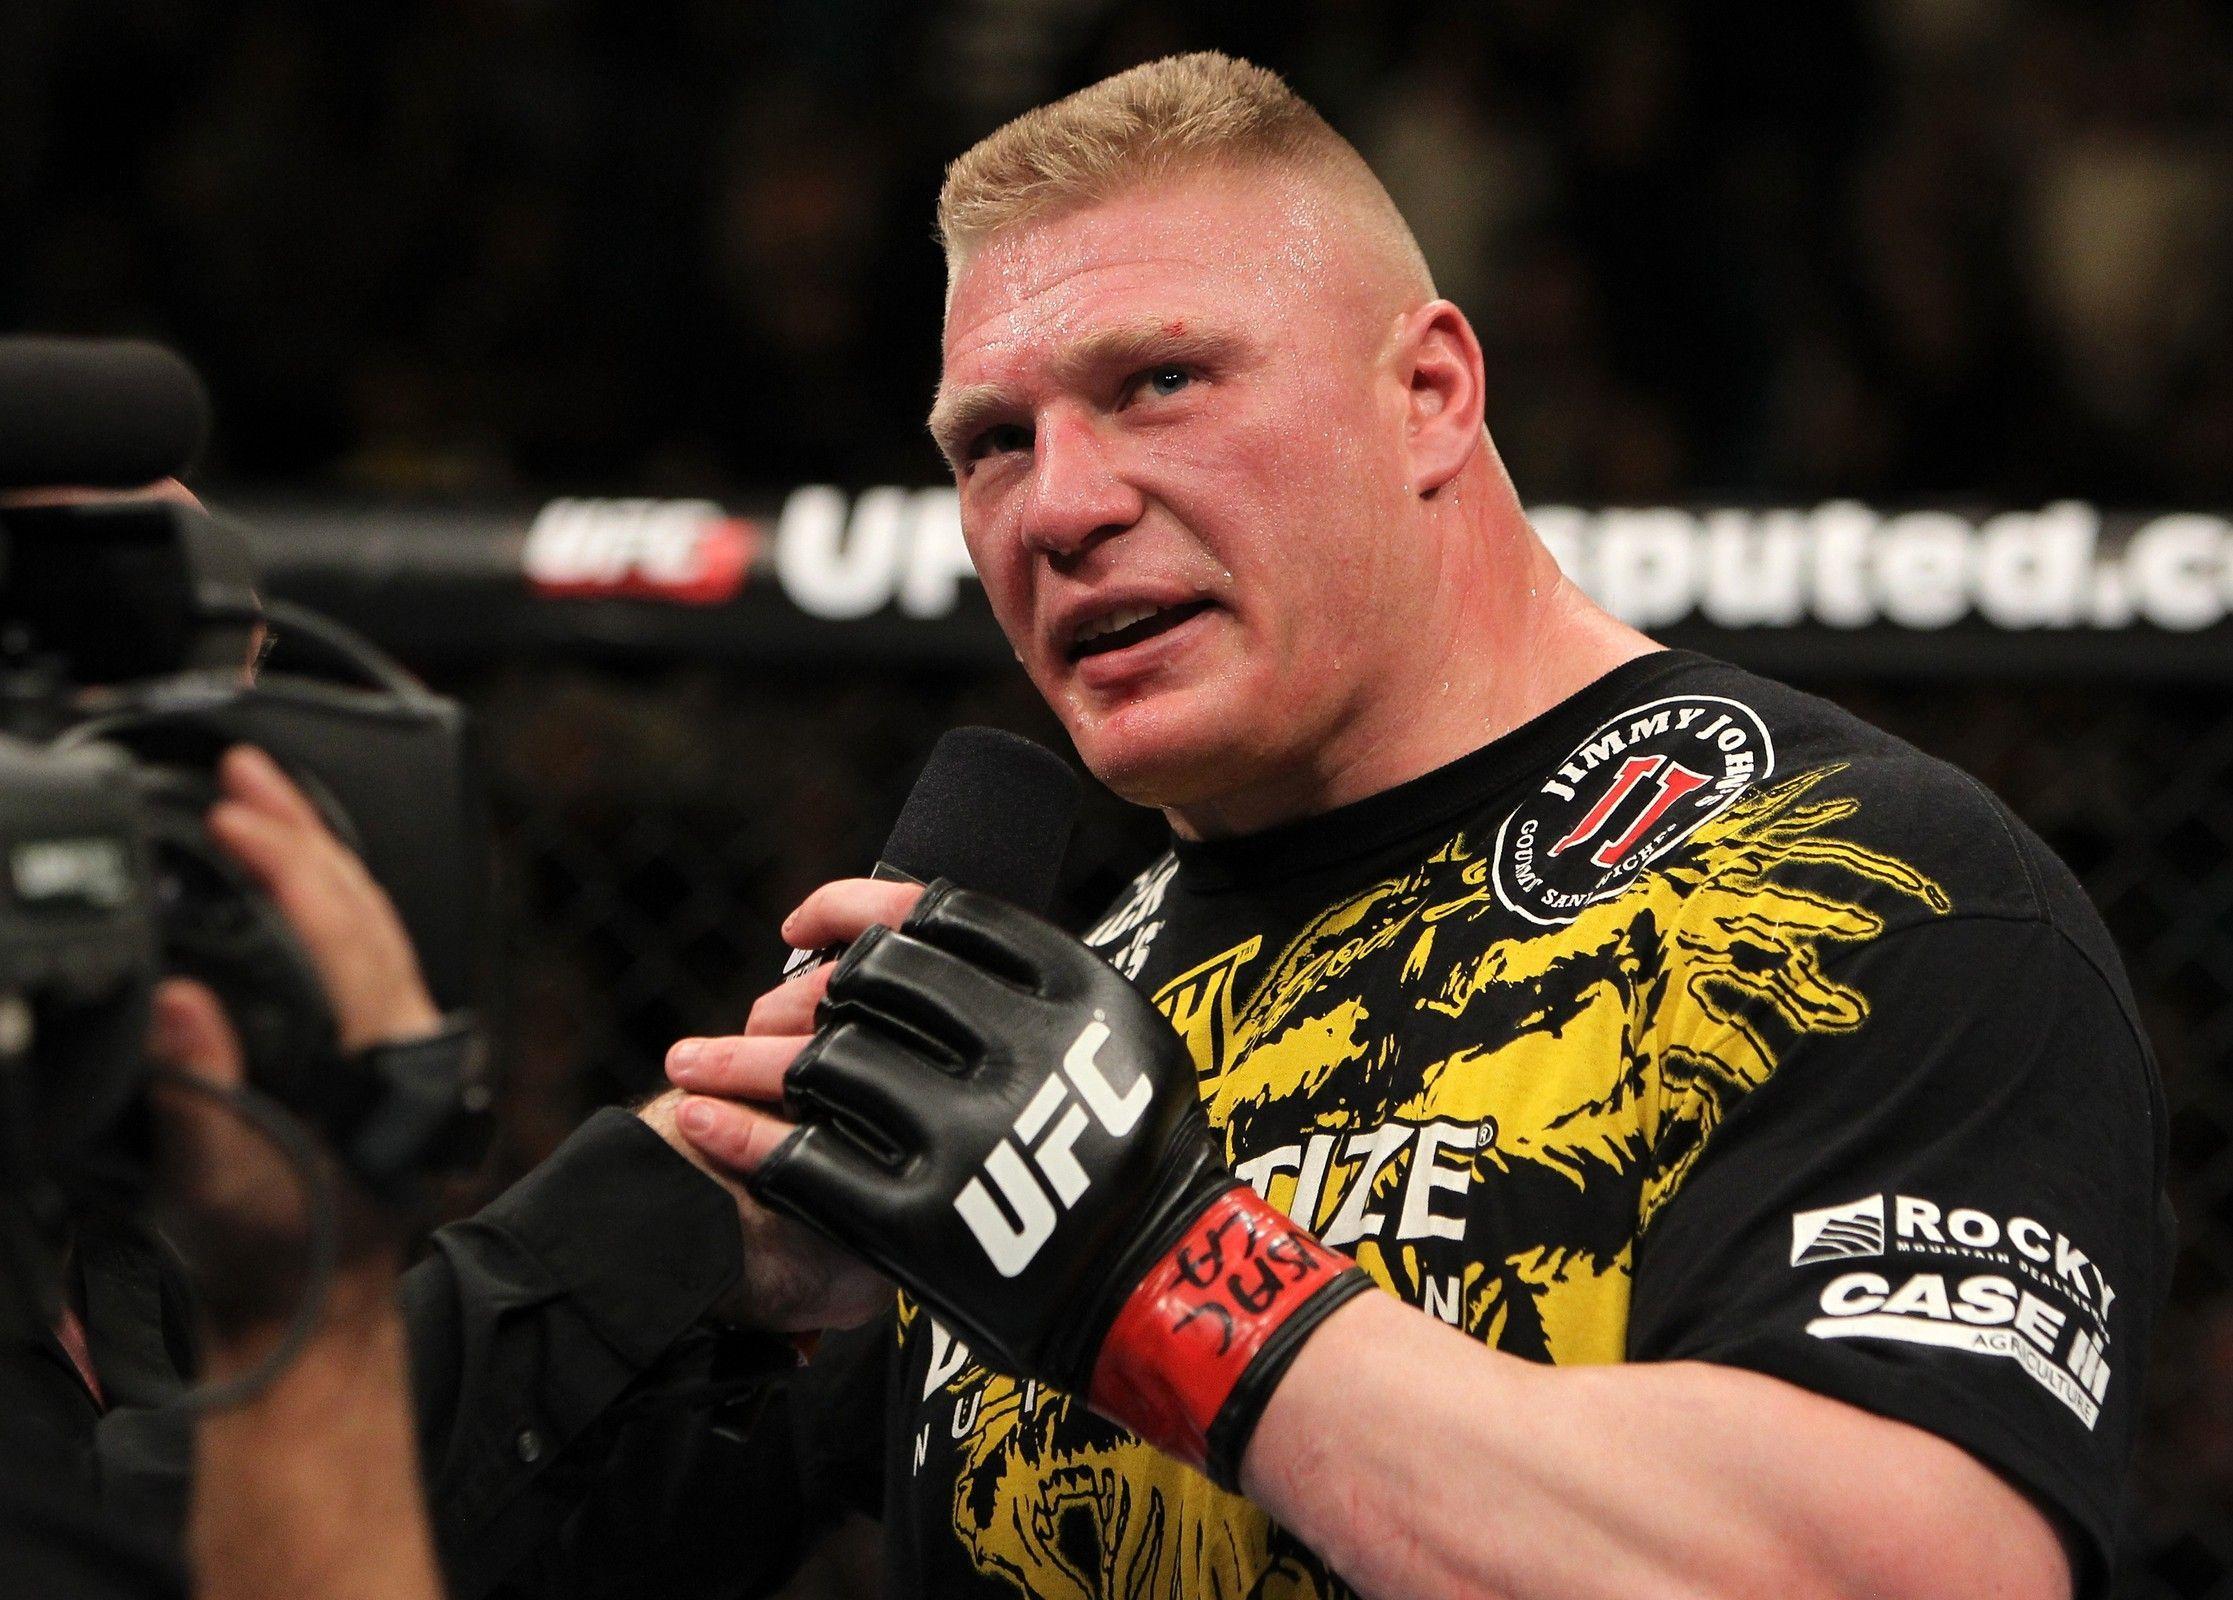 WWE Nation - RUMOR: Brock Lesnar to sign with UFC in early 2015